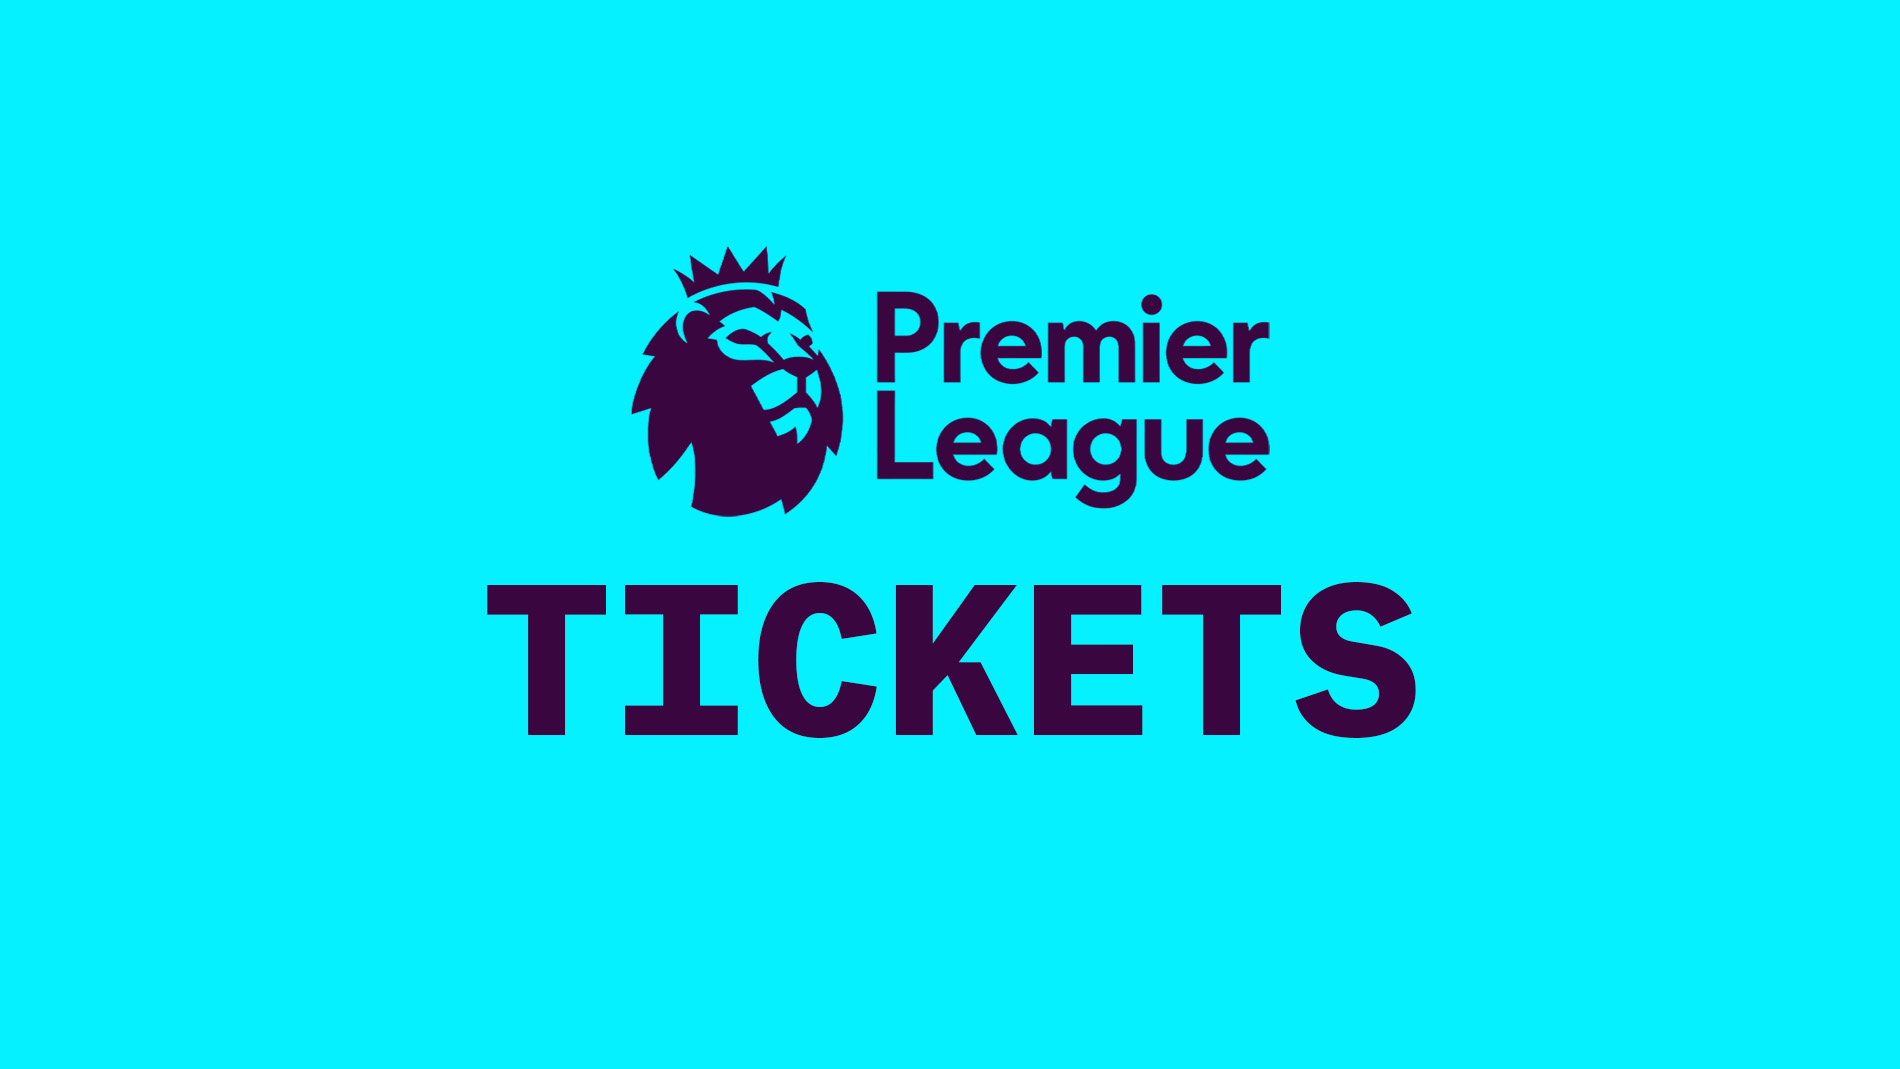 English Premier League tickets and prices.